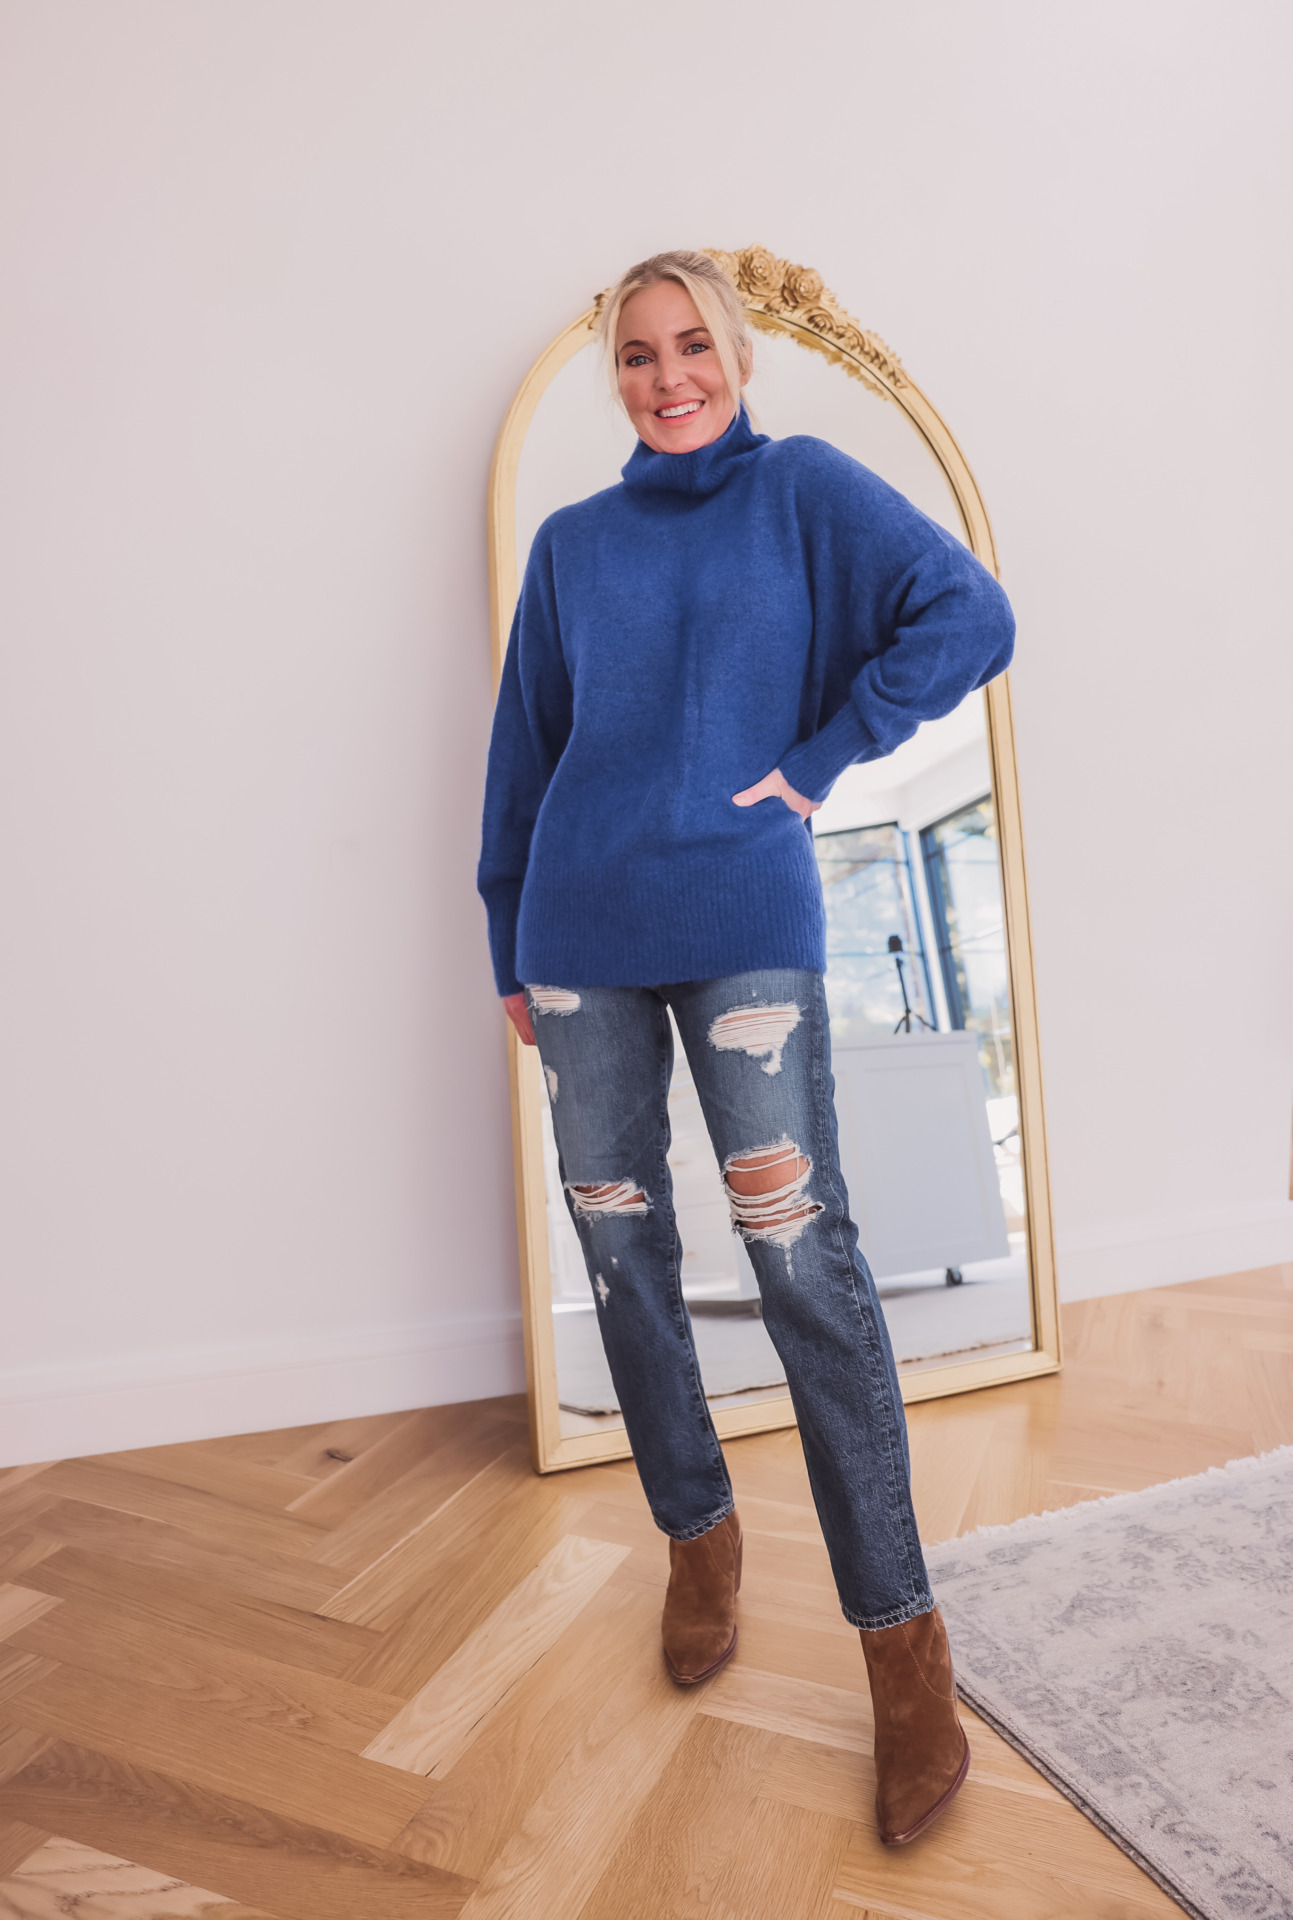 Banana Republic blue sweater and jeans